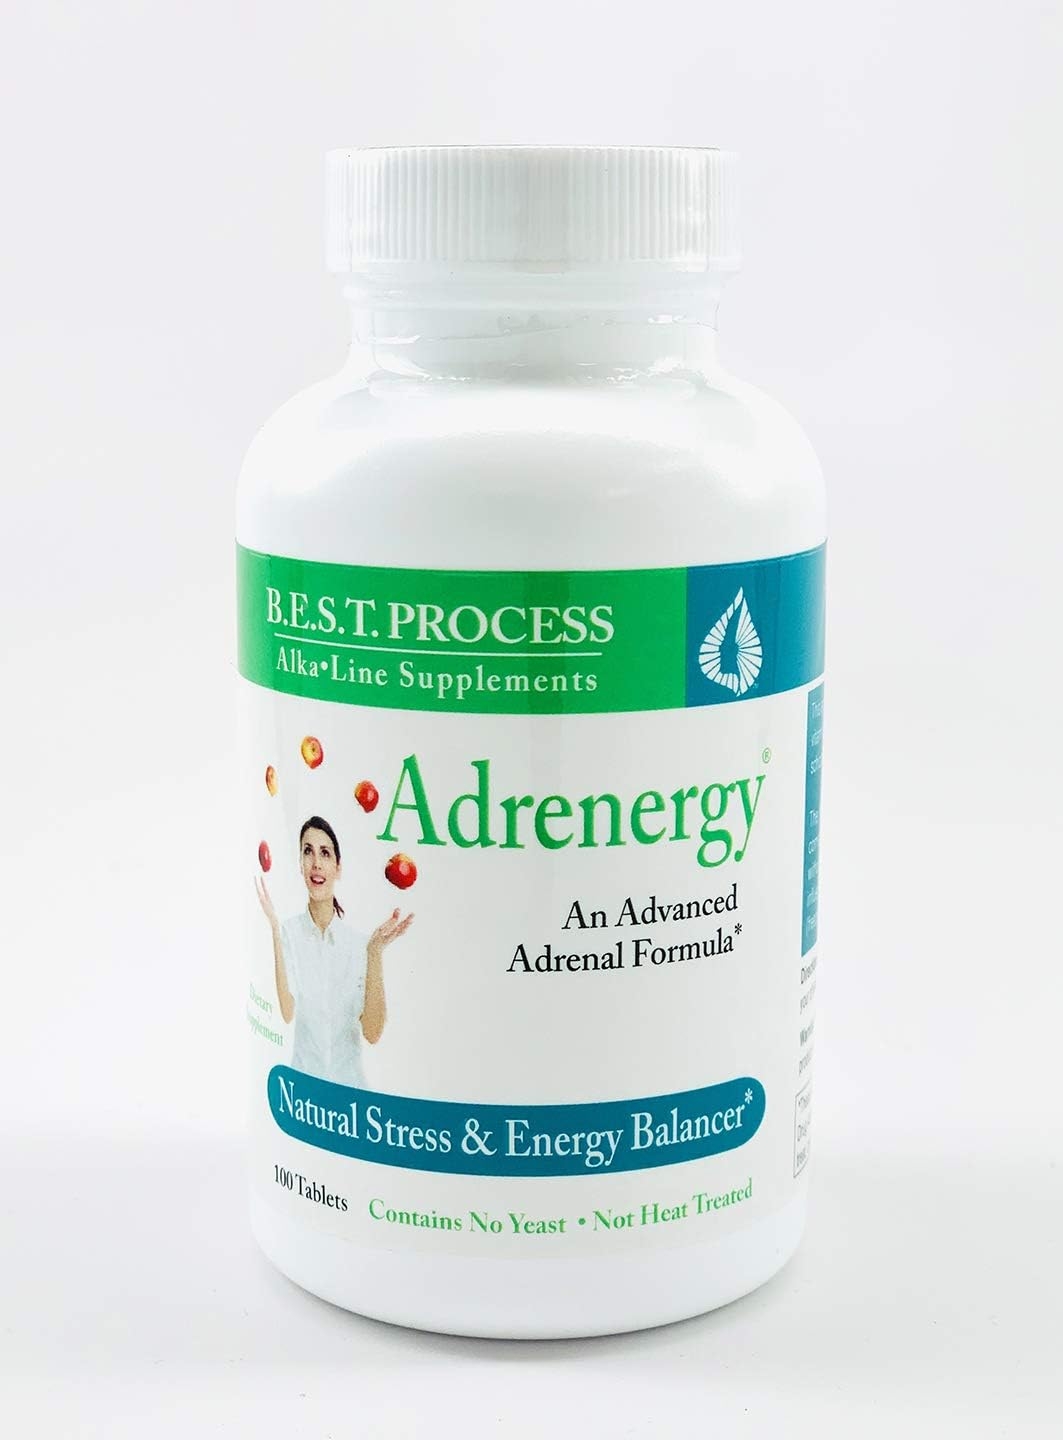 Adrenergy — Morter HealthSystem Best Process Alkaline — Natural Adrenal Support with Adrenal Gland Extract, Adaptogens, Vitamins & Minerals